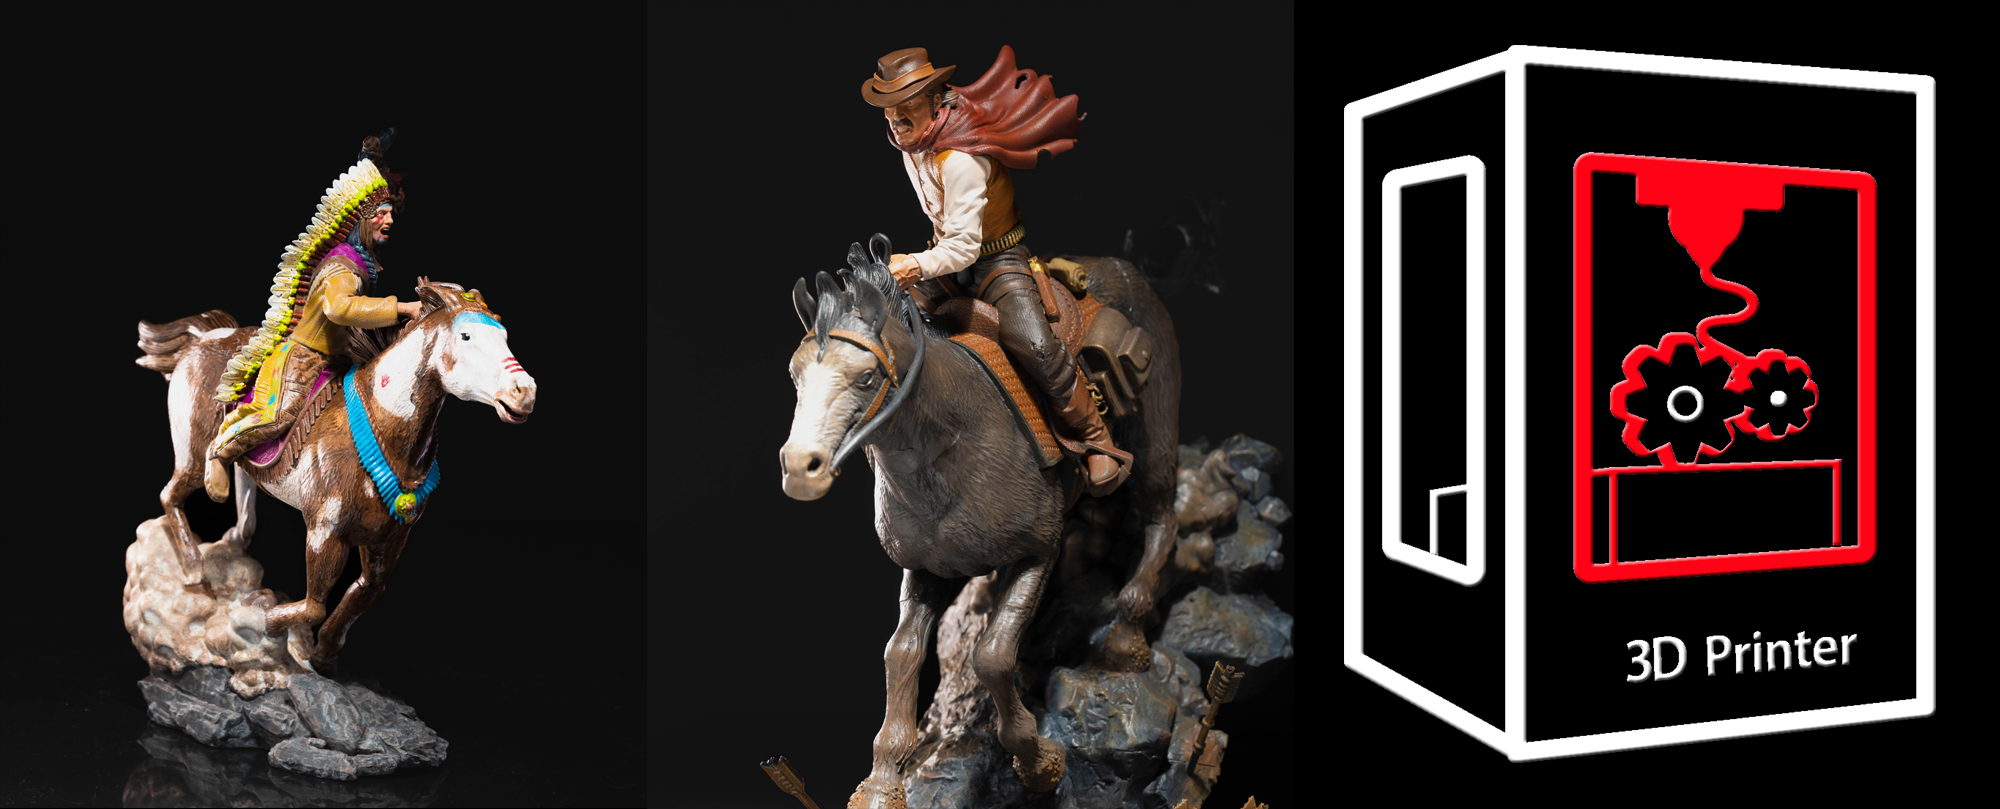 Cowboys and Indians Collection 3D Printer Model Files download